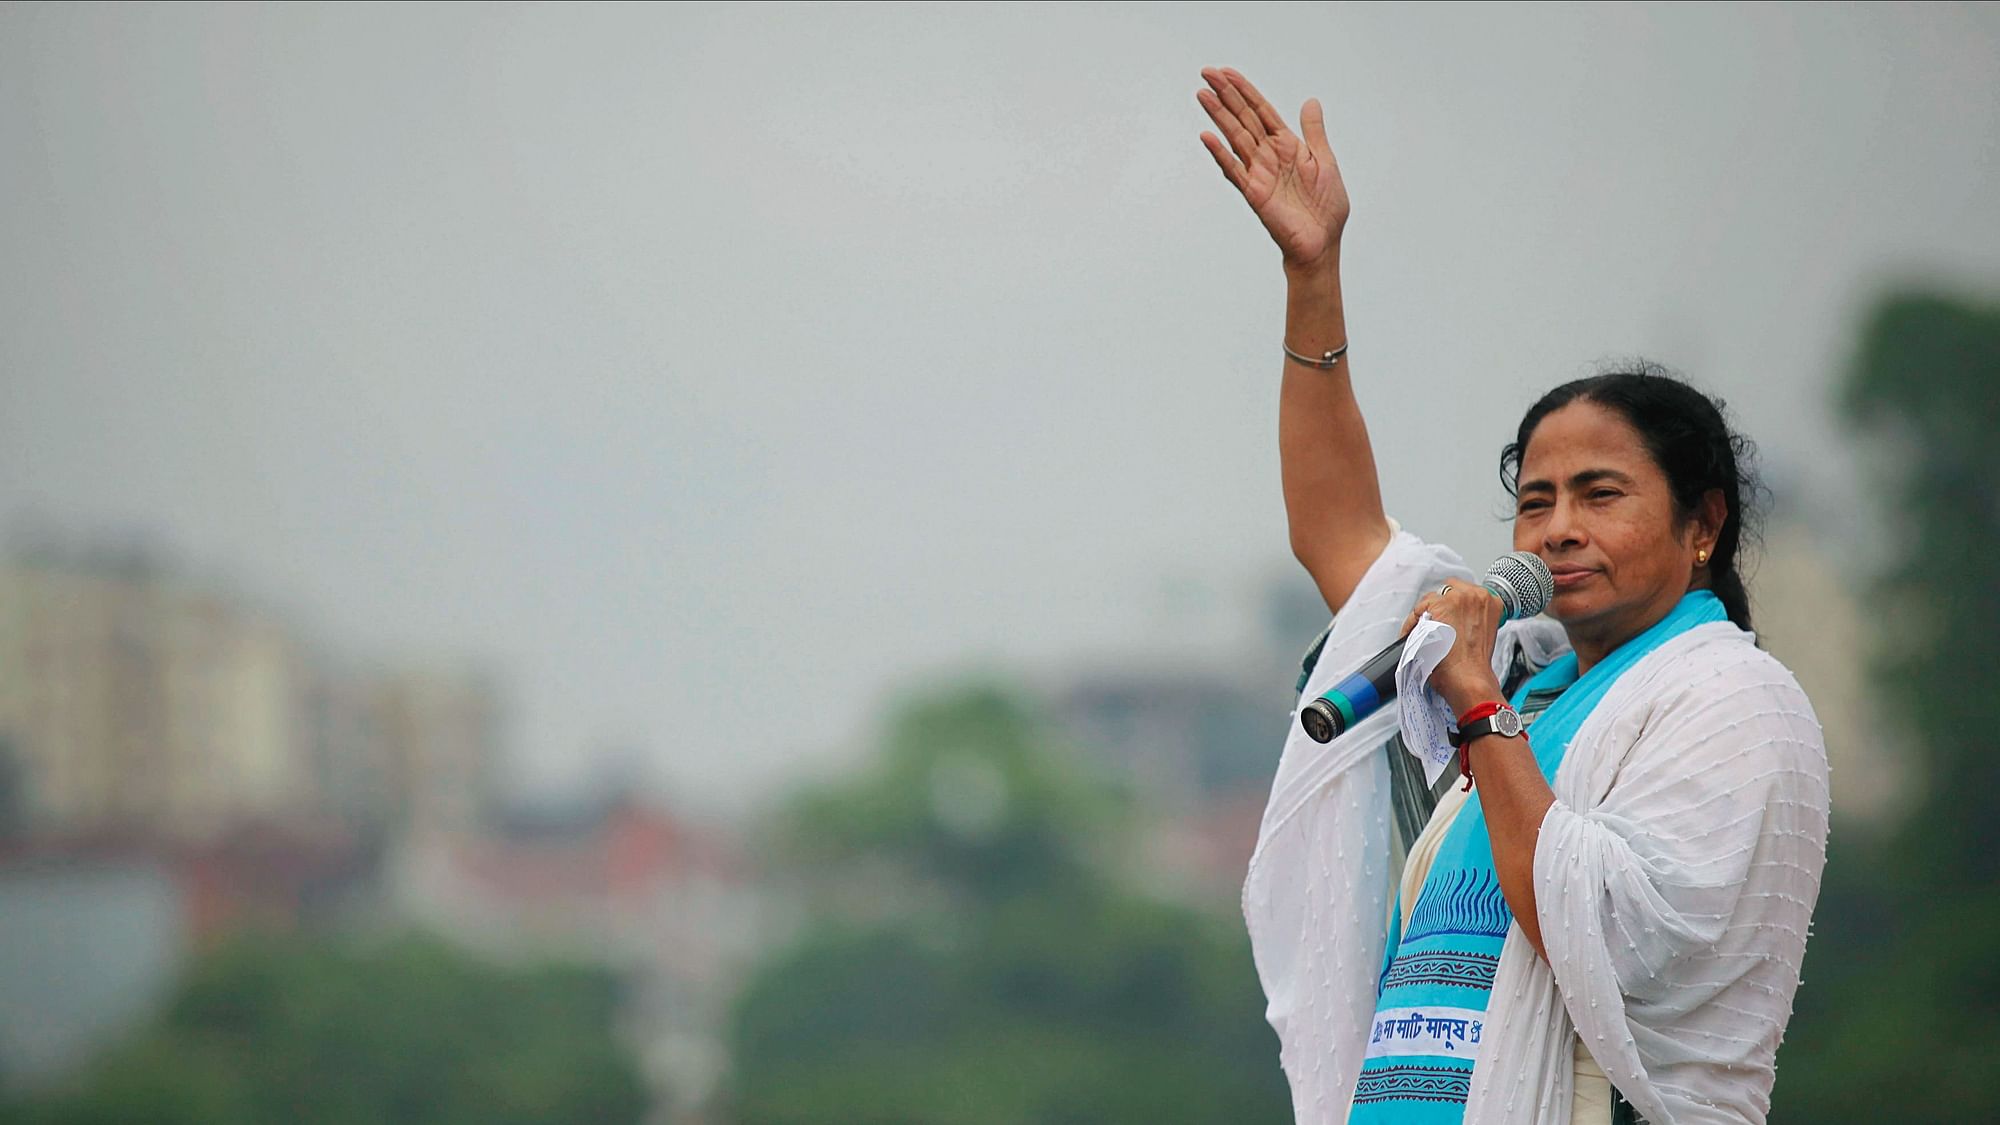 Bengal witnessed a saffron surge on Thursday, 23 May, as the BJP inflicted a body blow to Trinamool Congress.